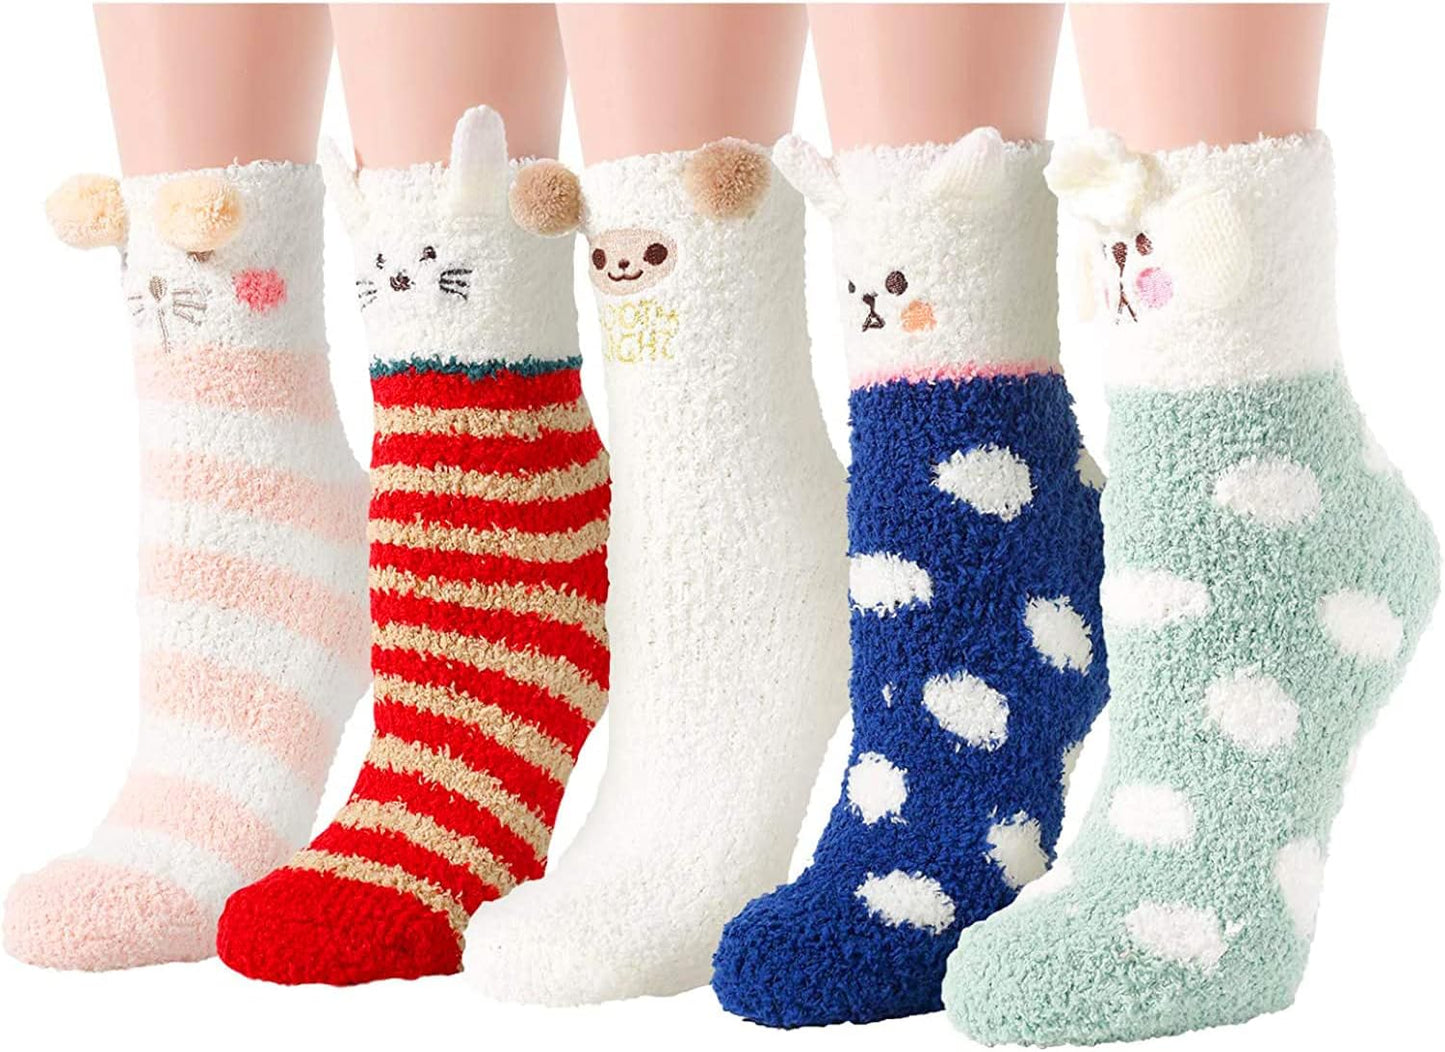 Women's Colorful Animal Slipper Socks with Fuzzy Texture for Indoor Use